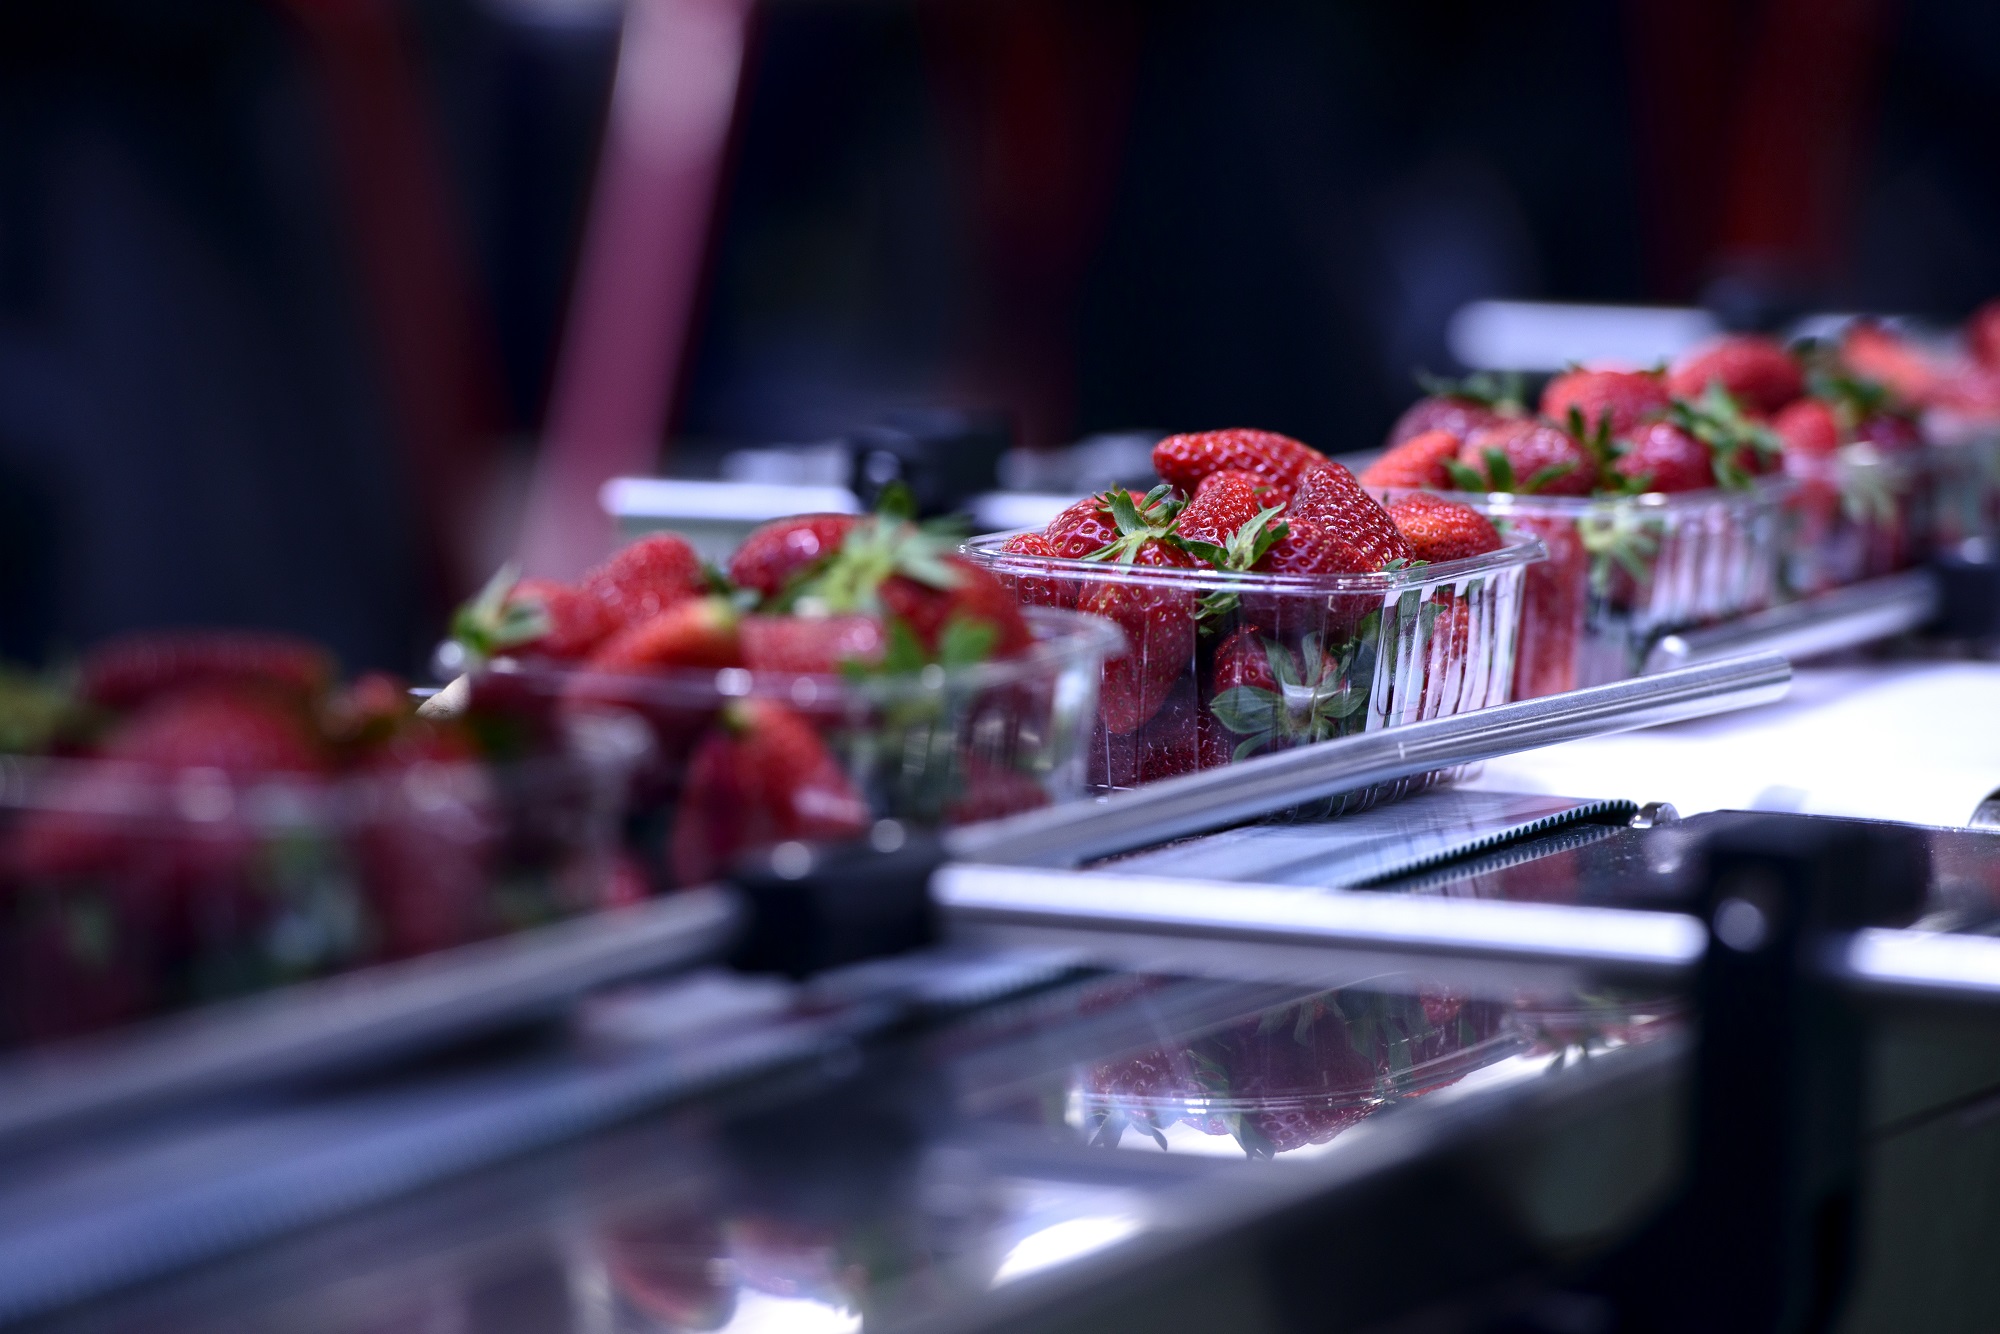 A row of red strawberries in plastic punnets on a production line in a factory setting.